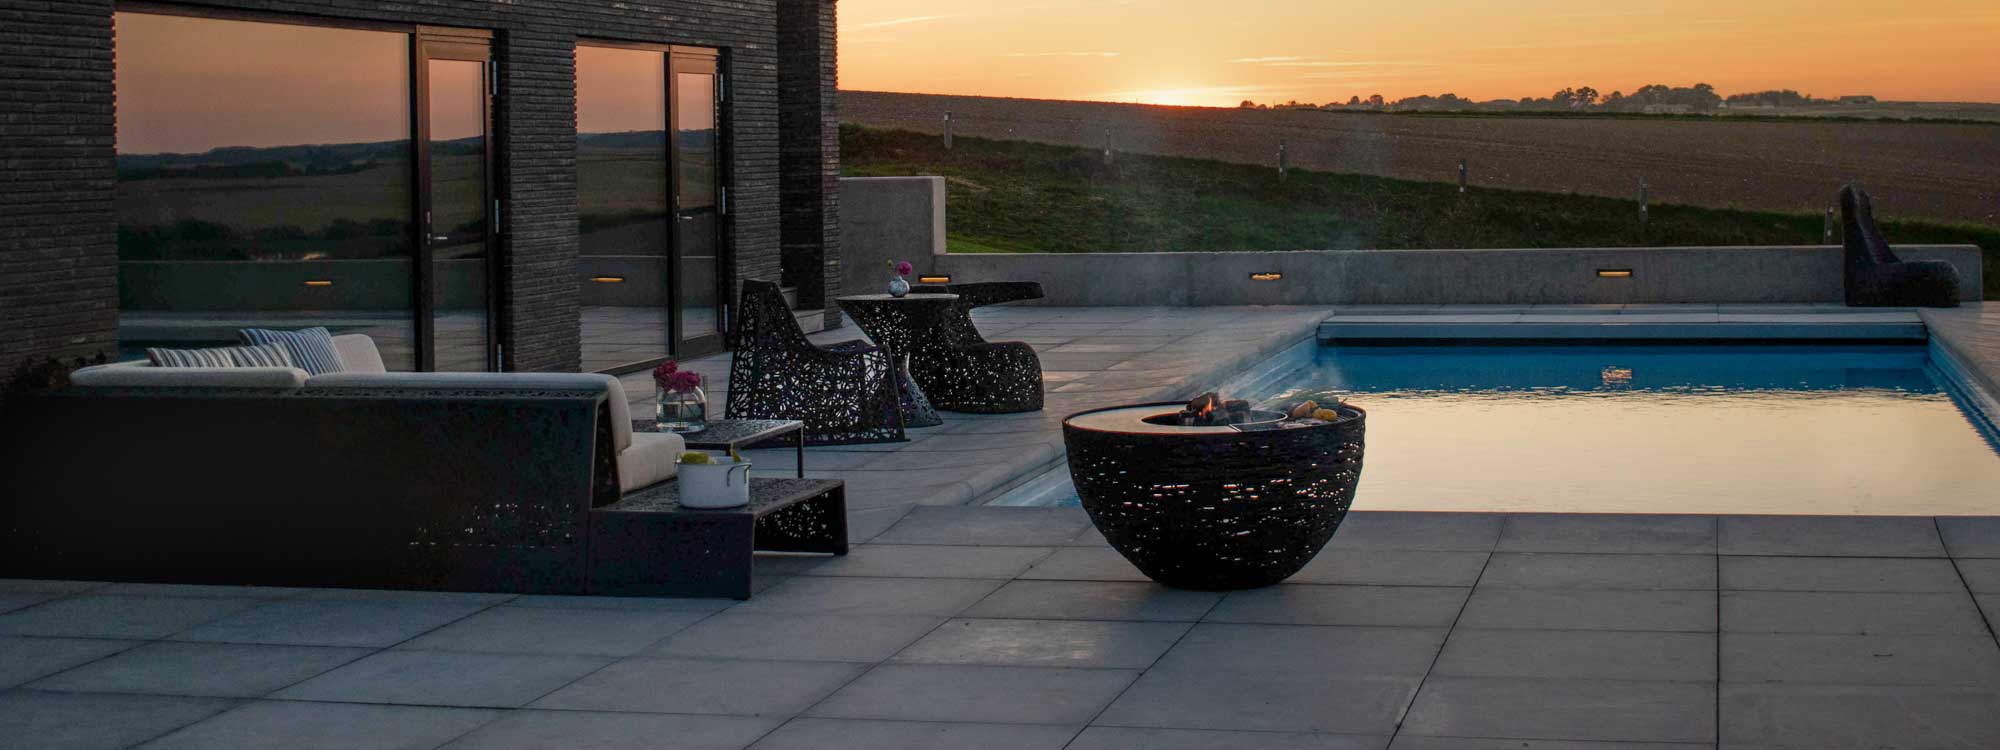 Image of wafts of smoke & smells rising from food cooking on Lava Nest BBQ and fire pit by Unknown Nordic, shown on poolside at dusk